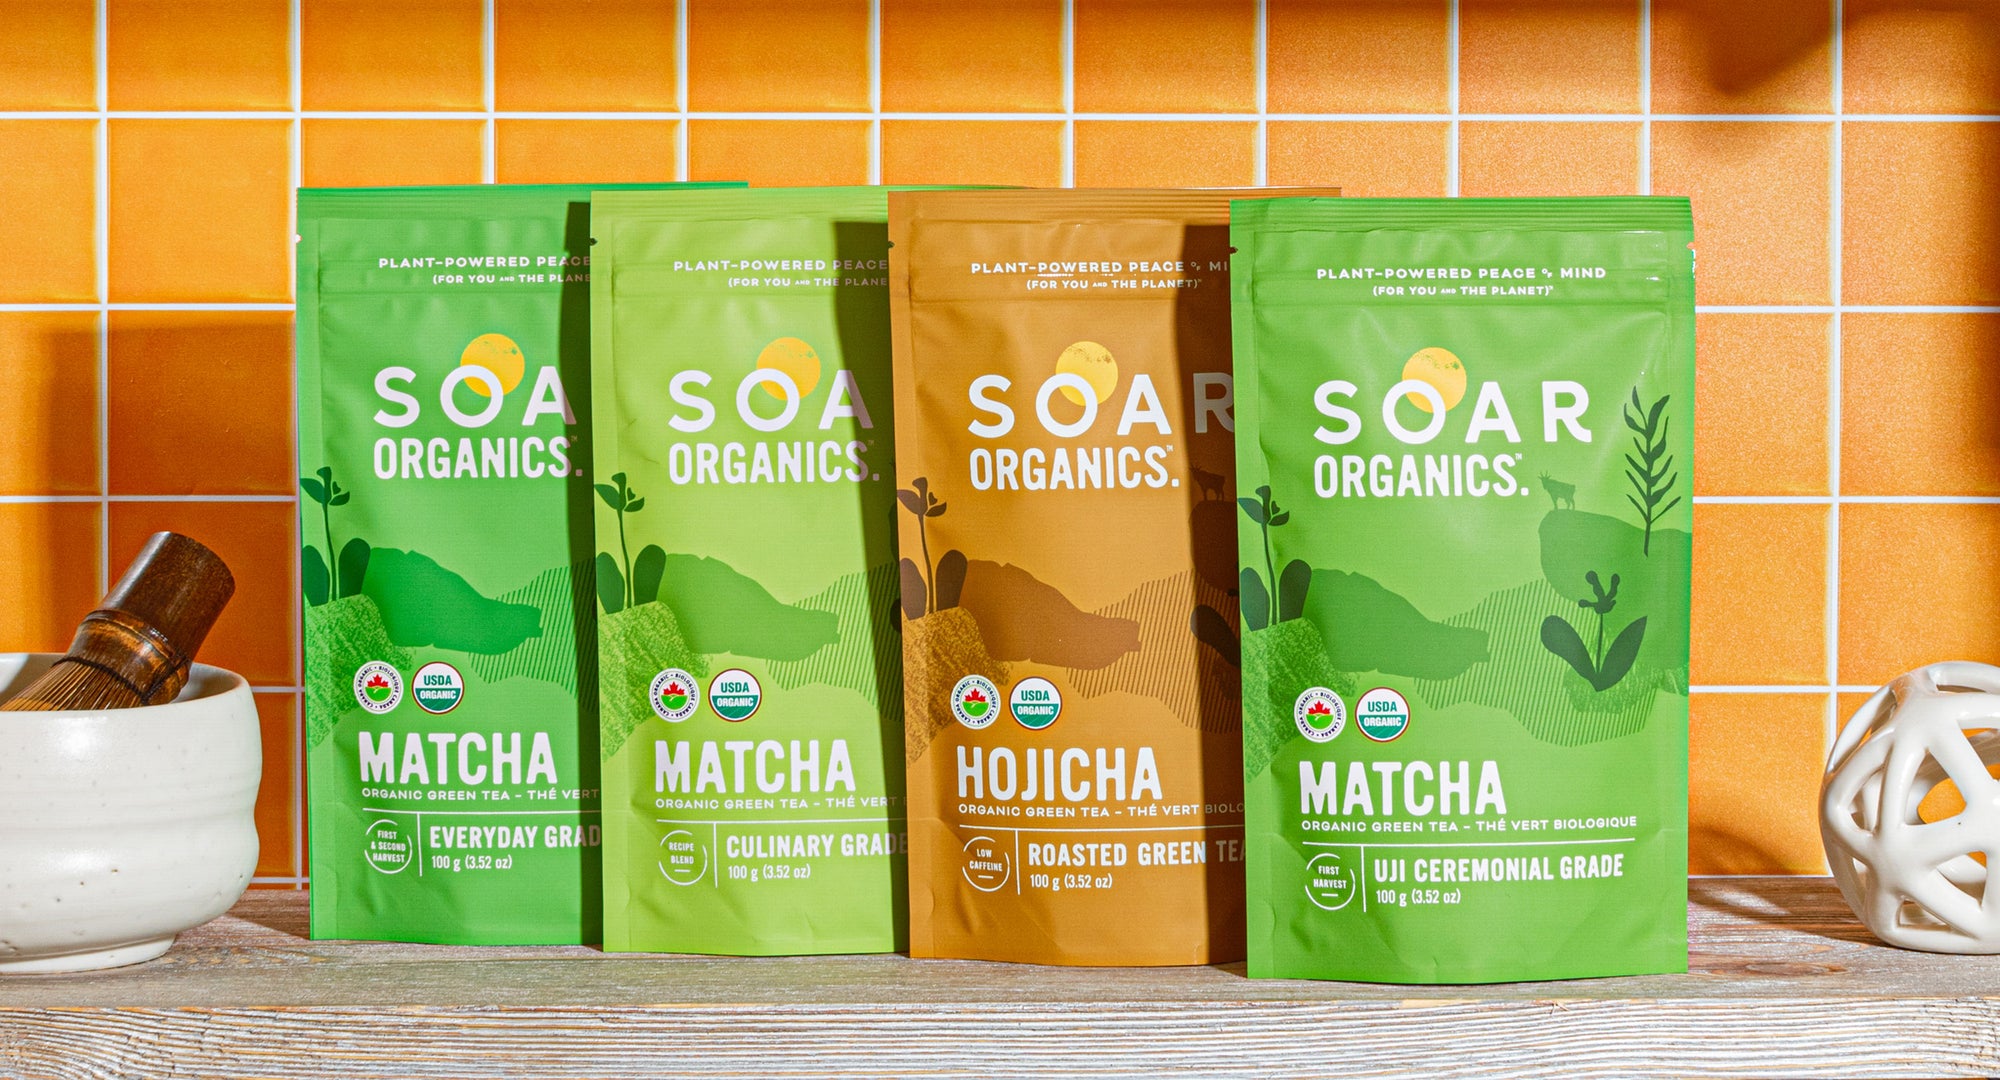 Matcha vs. Hojicha: What's the Difference?